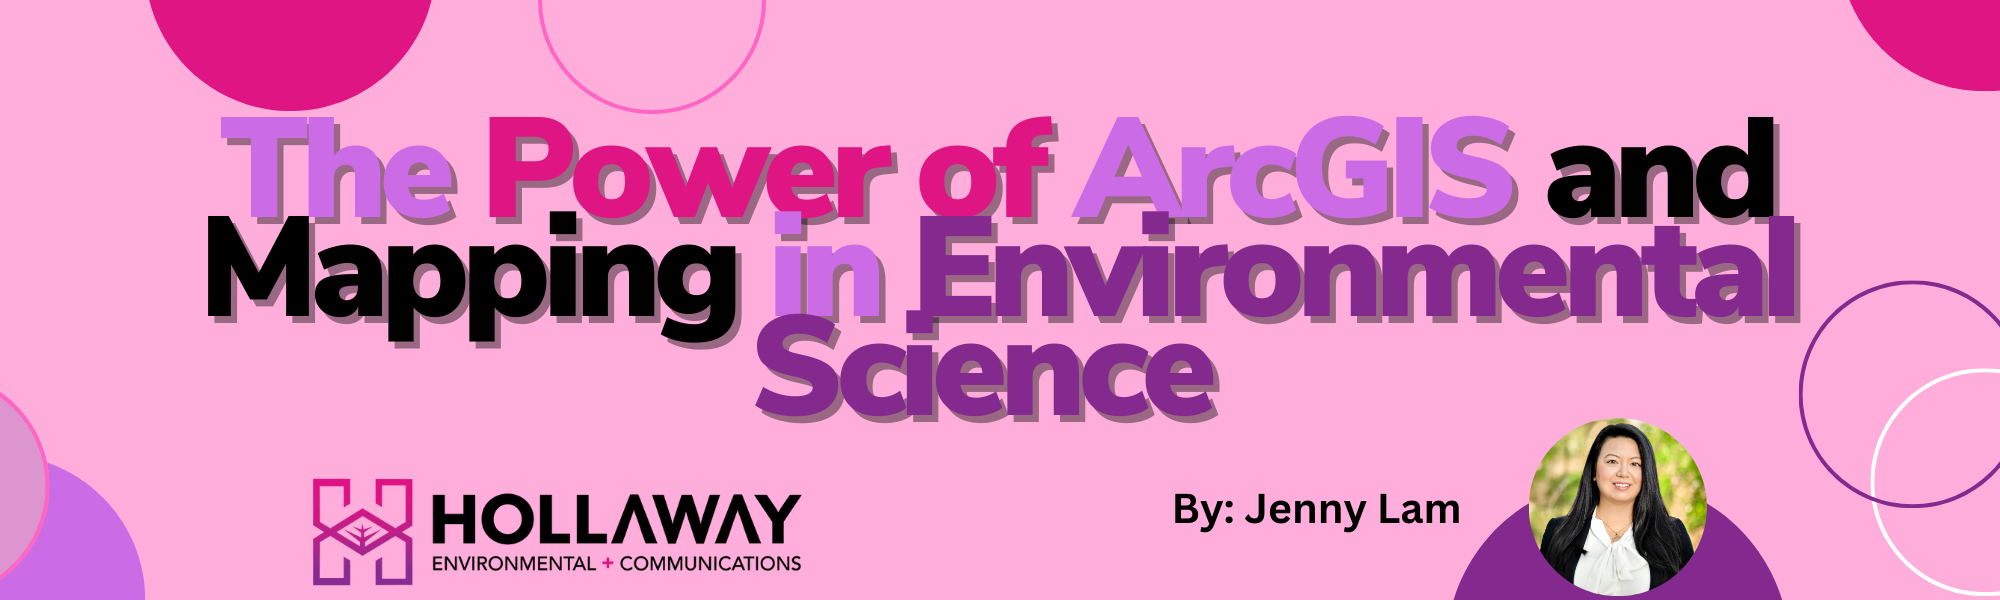 ARCGis Blog Post Cover Photo